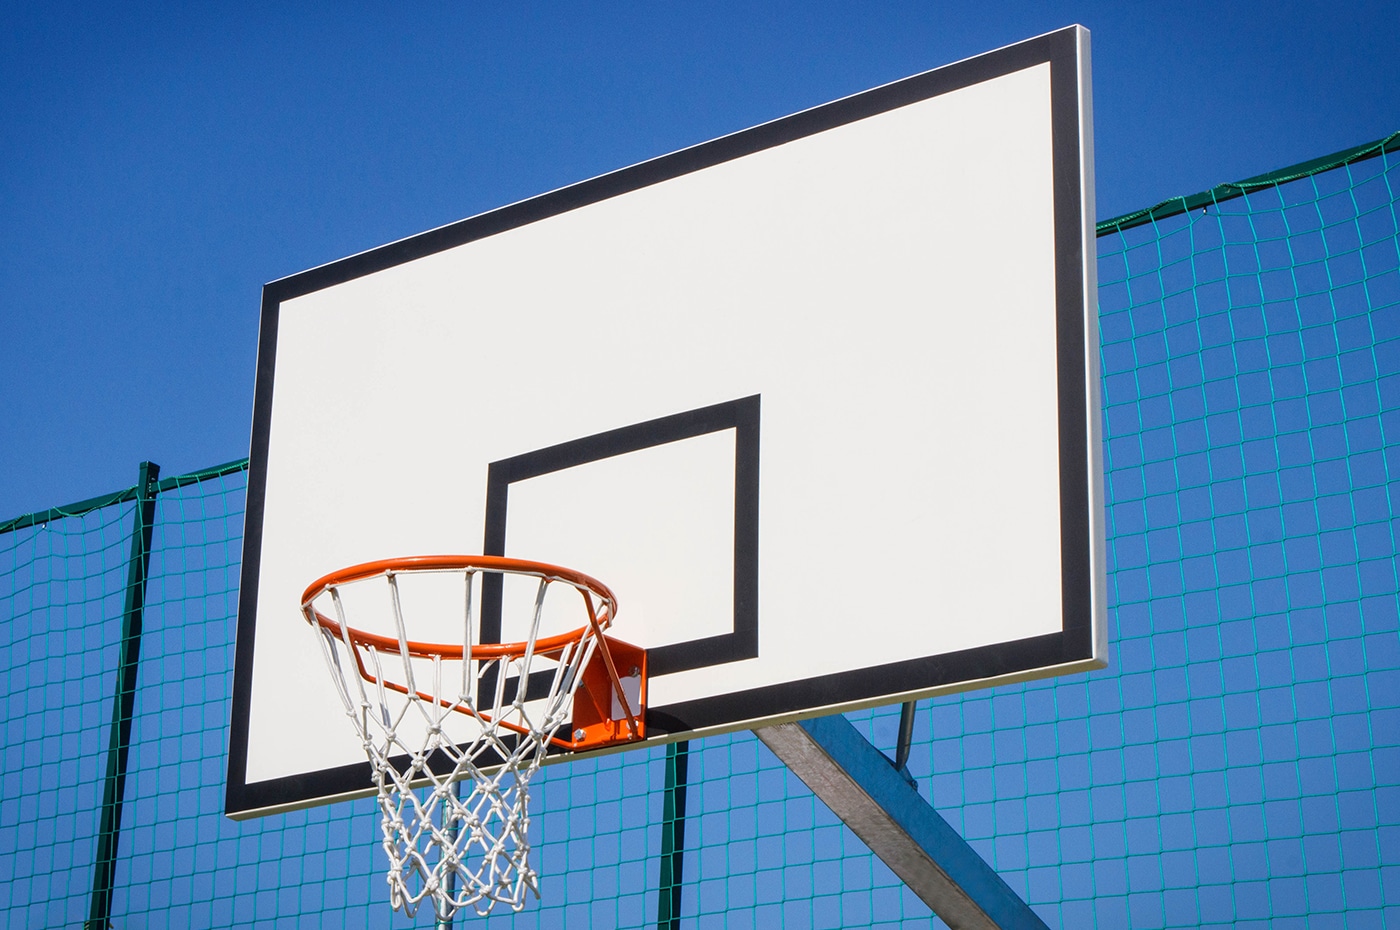 Basketball Board With Basket Hoop On Playground. Sport, Recreation And Healthy Lifestyles On Fresh Air